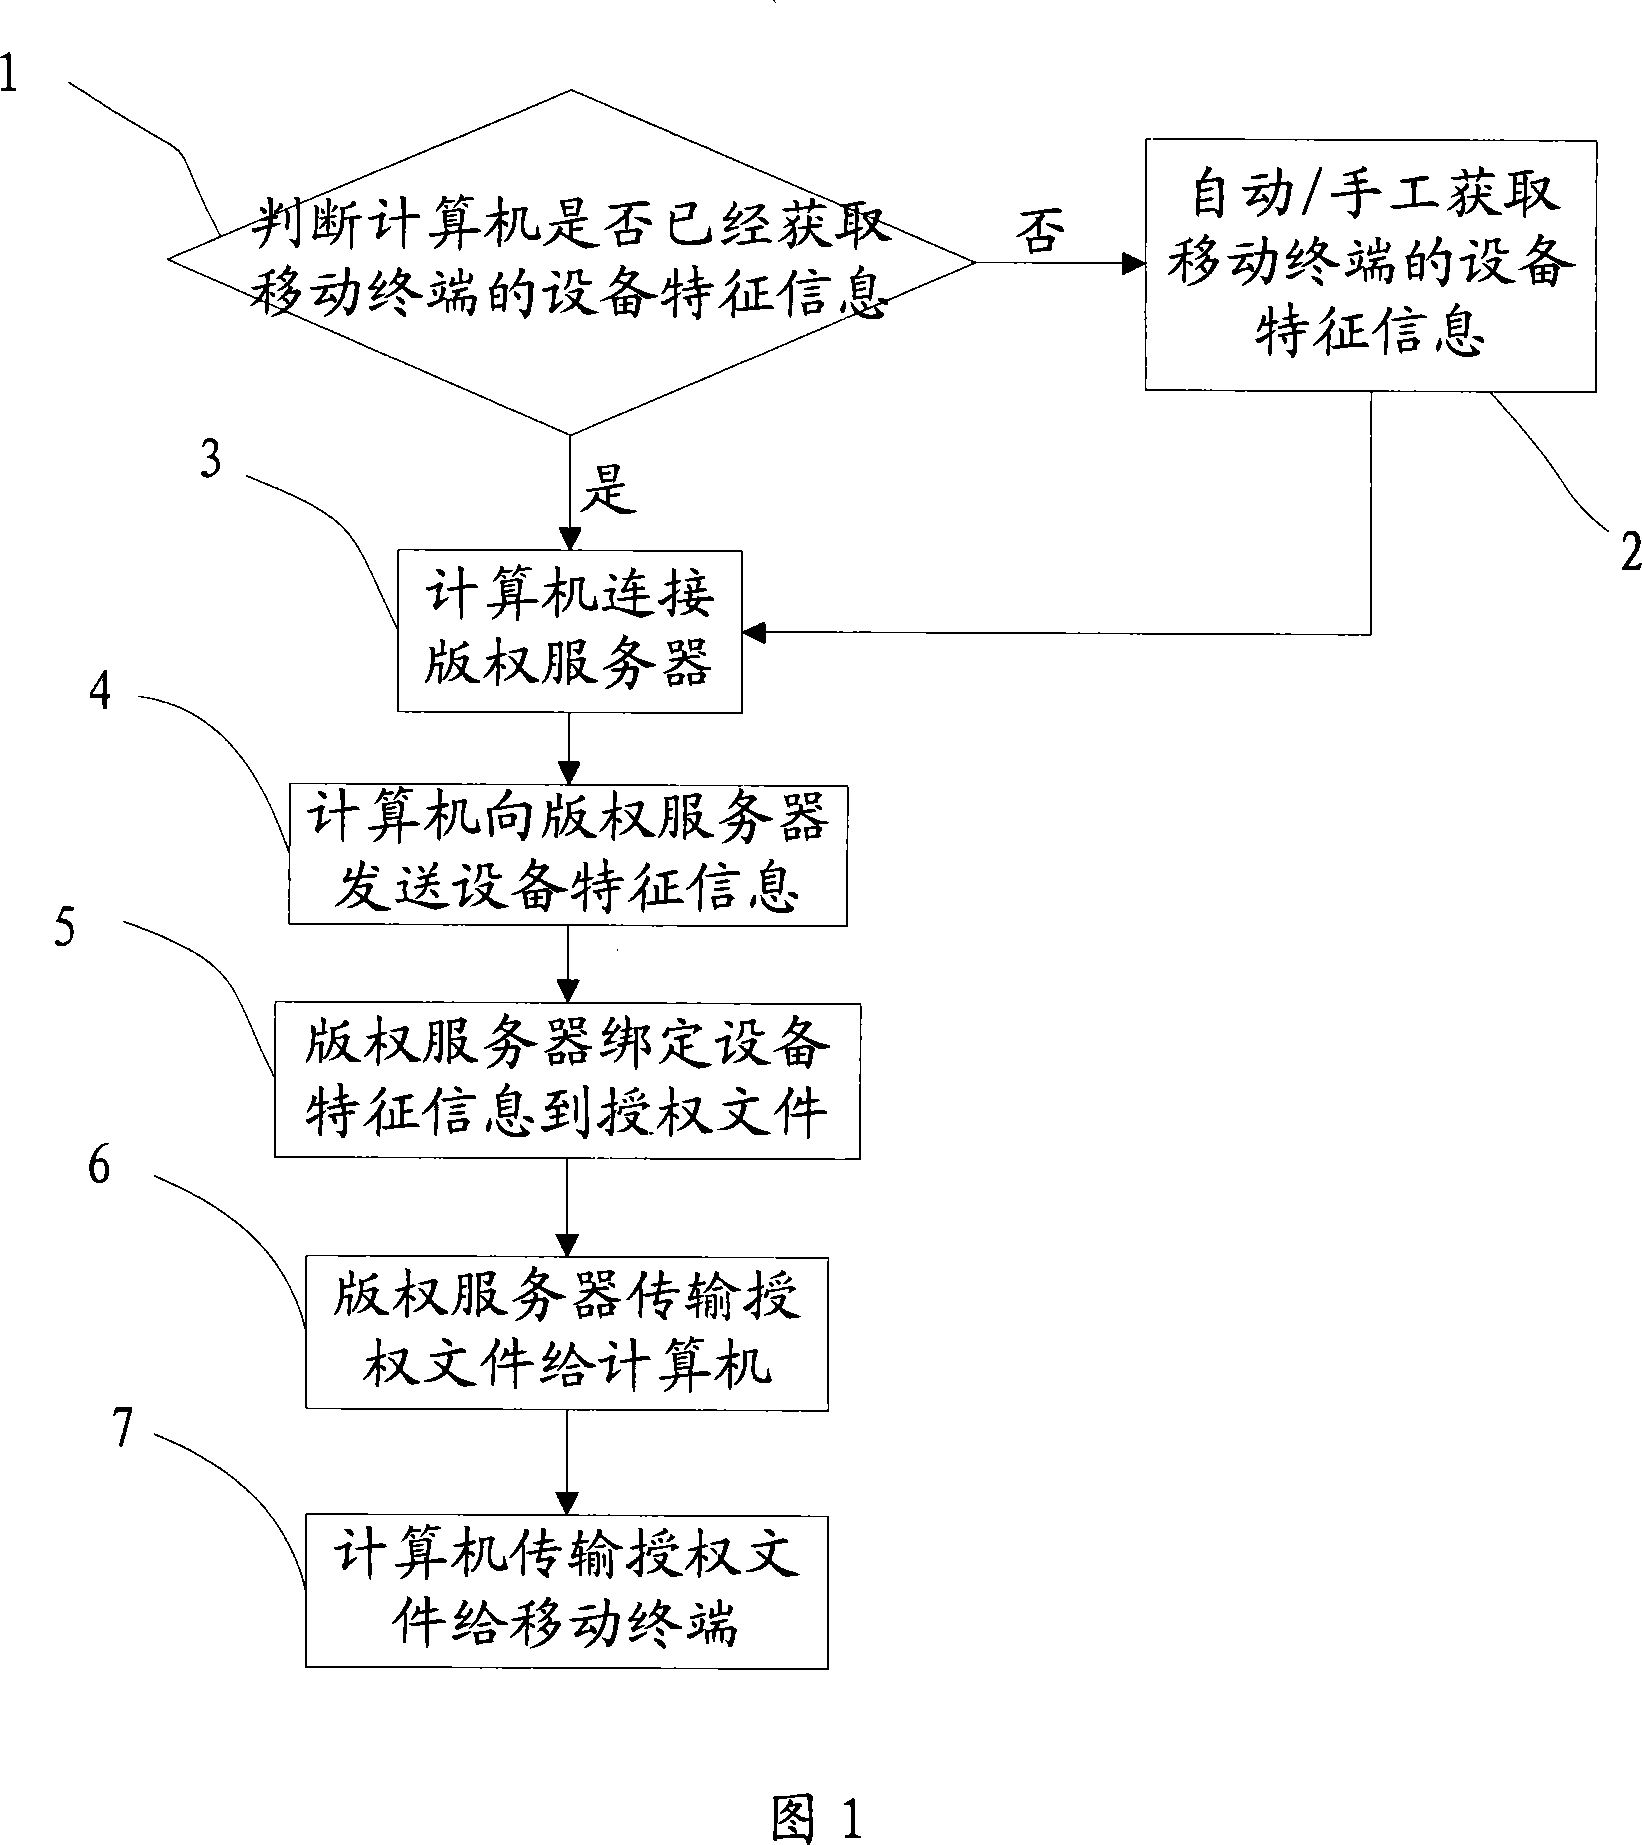 Authorization file and mobile terminal binding method of digital content